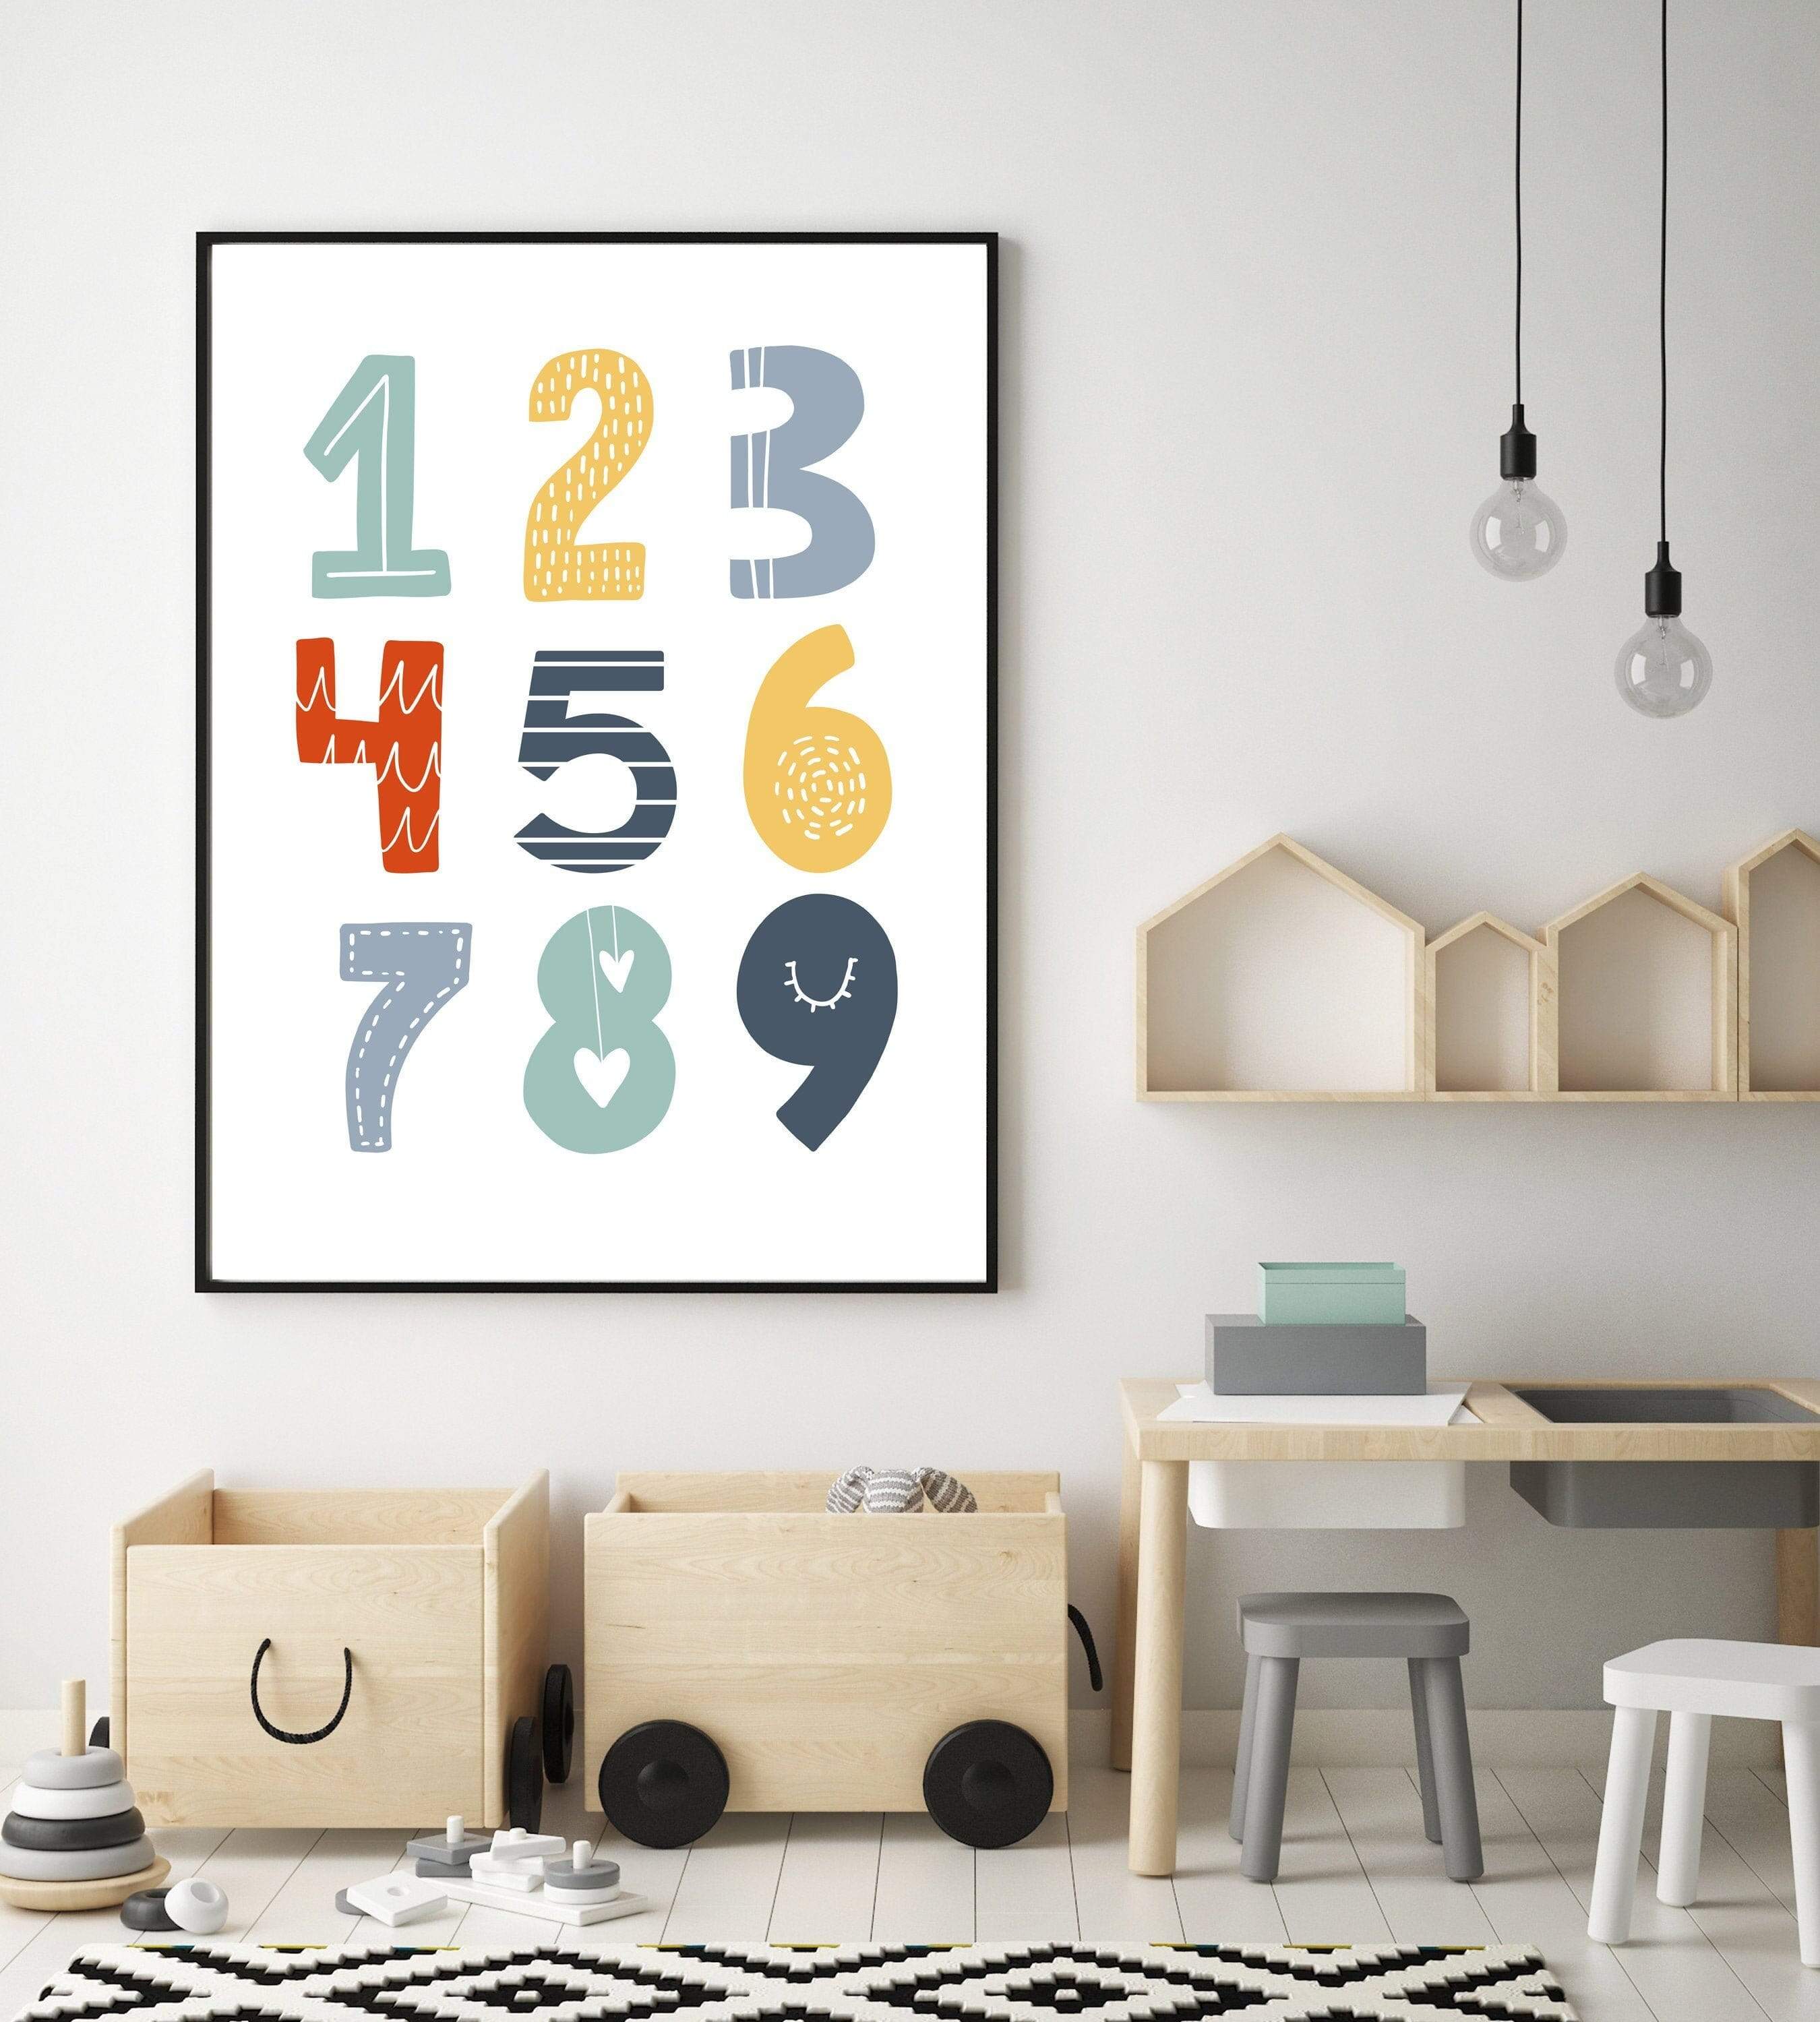 Number prints - Number poster - Prints for boys room - 123 poster - Playroom wall art - Numbers for nursery - Numbers printable - Baby boy nursery art print baby nursery bedroom decor